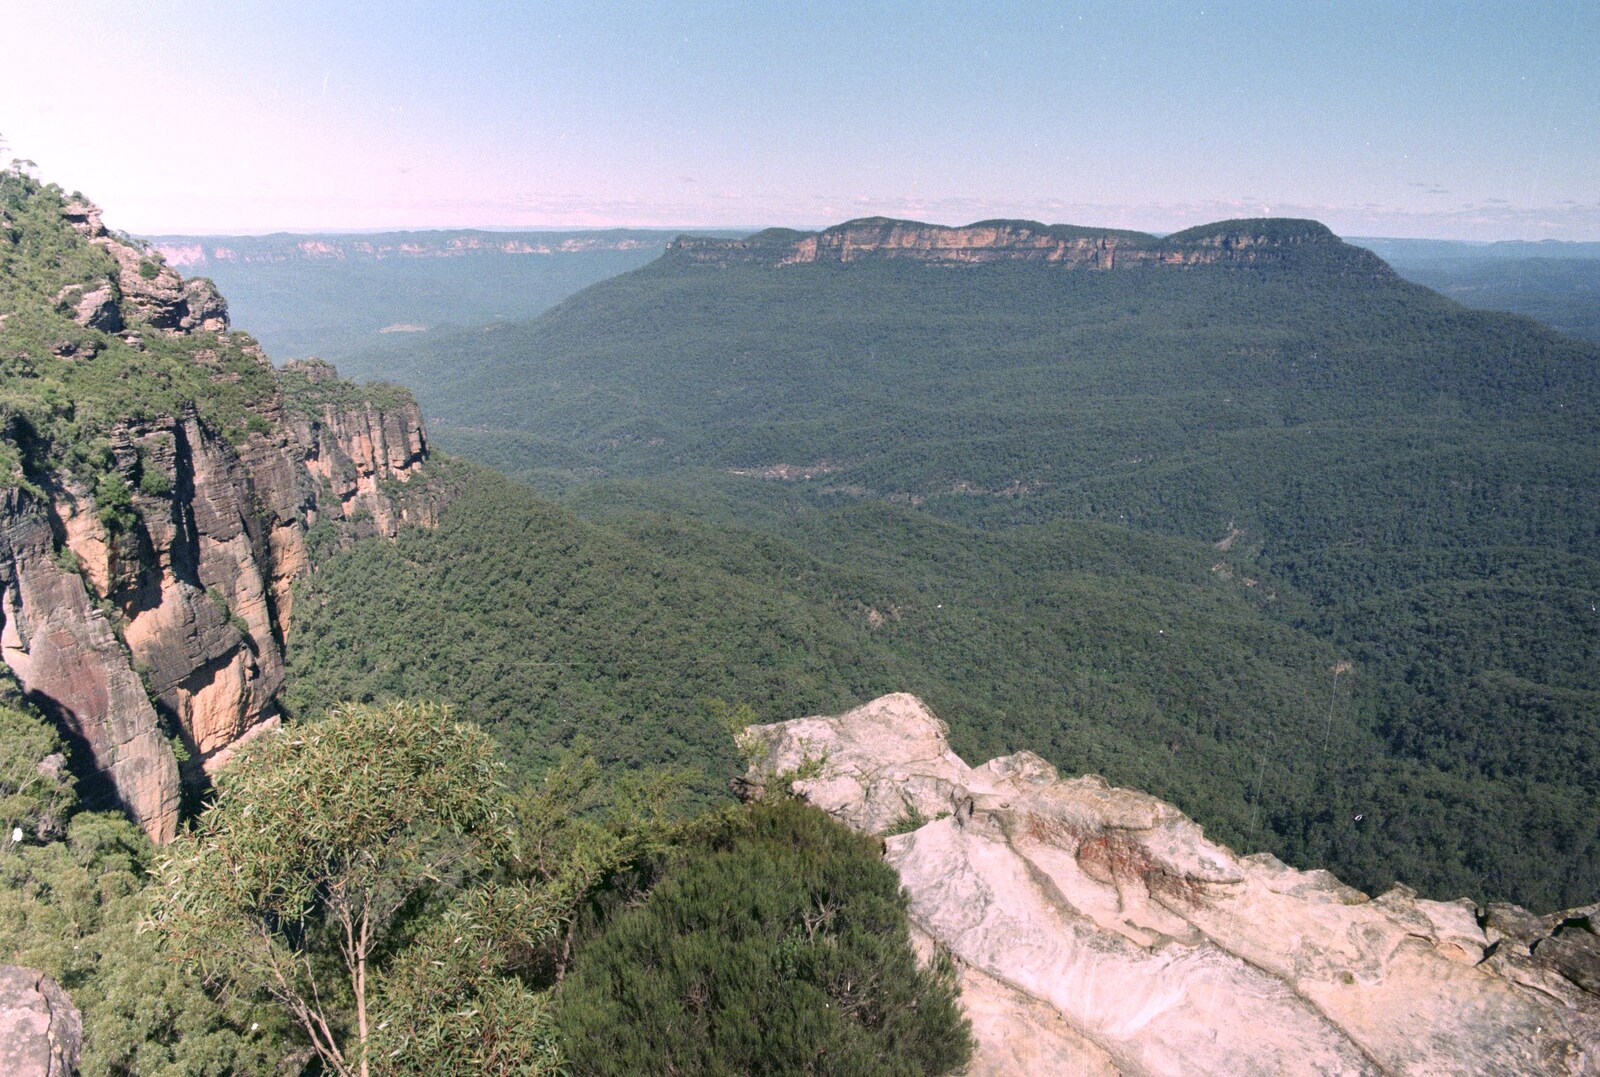 A wide vista in the Blue Mountains from A Trip to the Blue Mountains, New South Wales, Australia - 12th April 2000